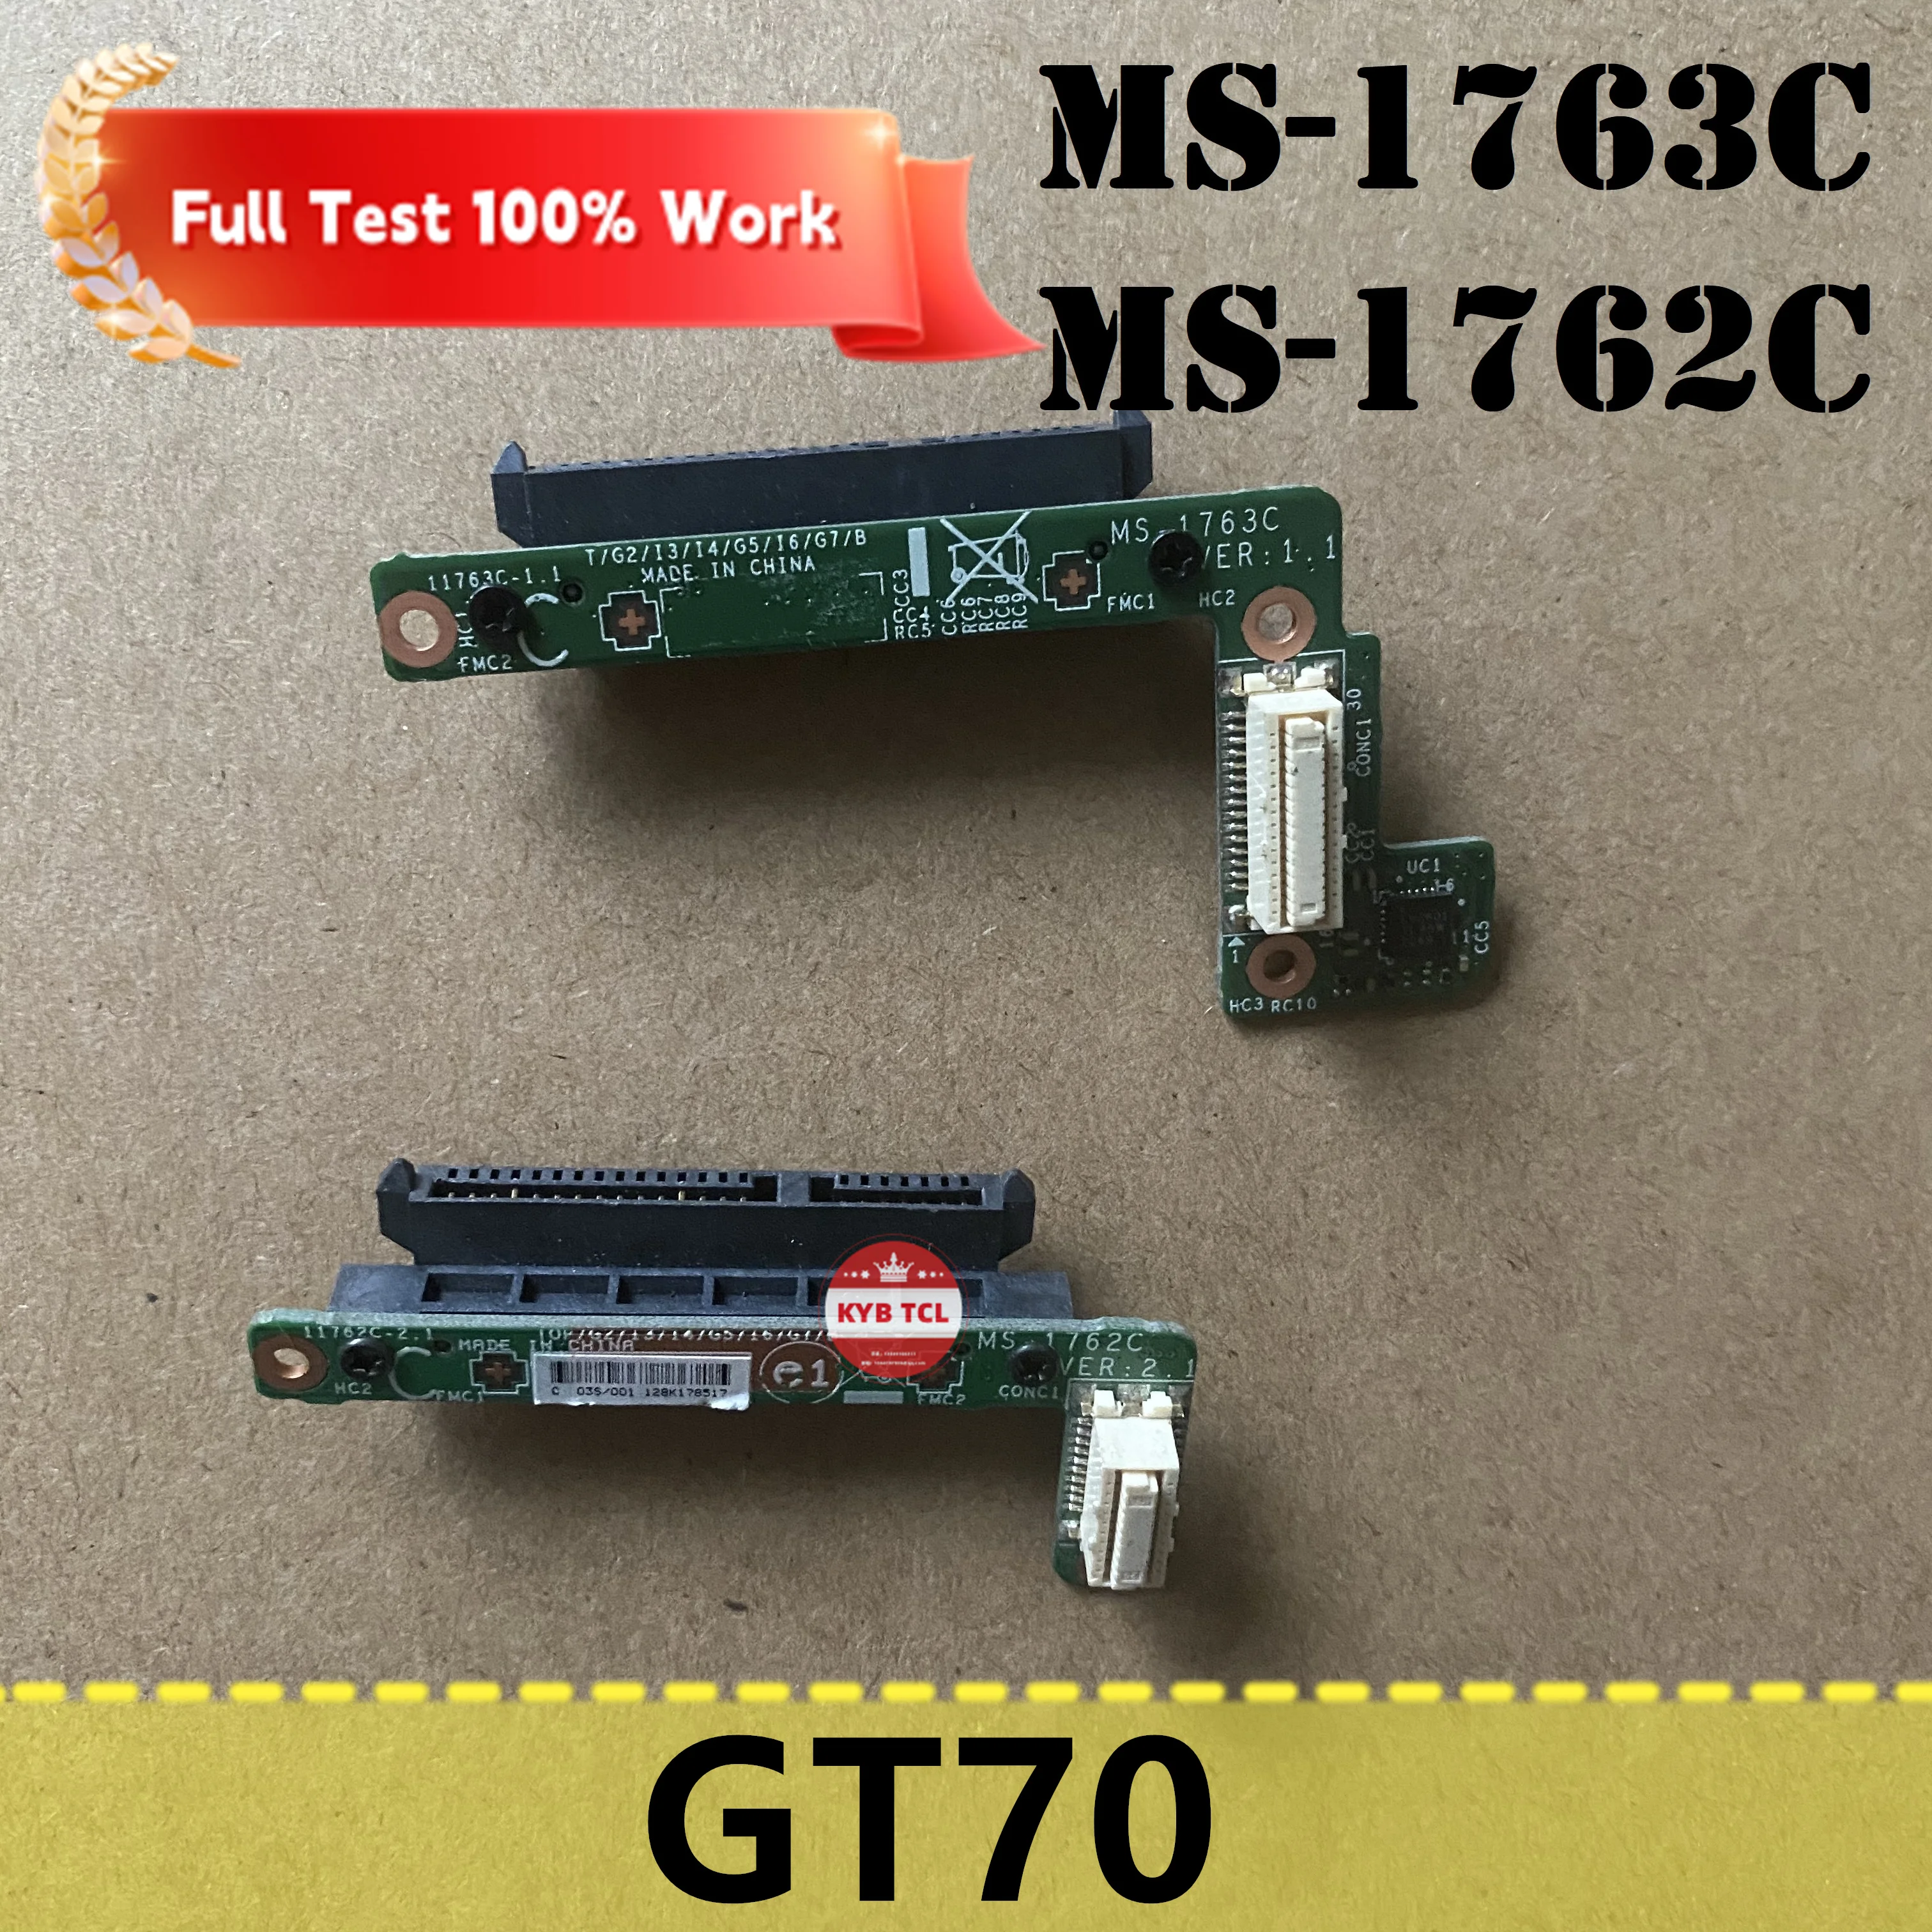 

Laptop SATA HDD Hard Drive Connector Board For MSI GT70 MS-1763C MS-1762C Notebook